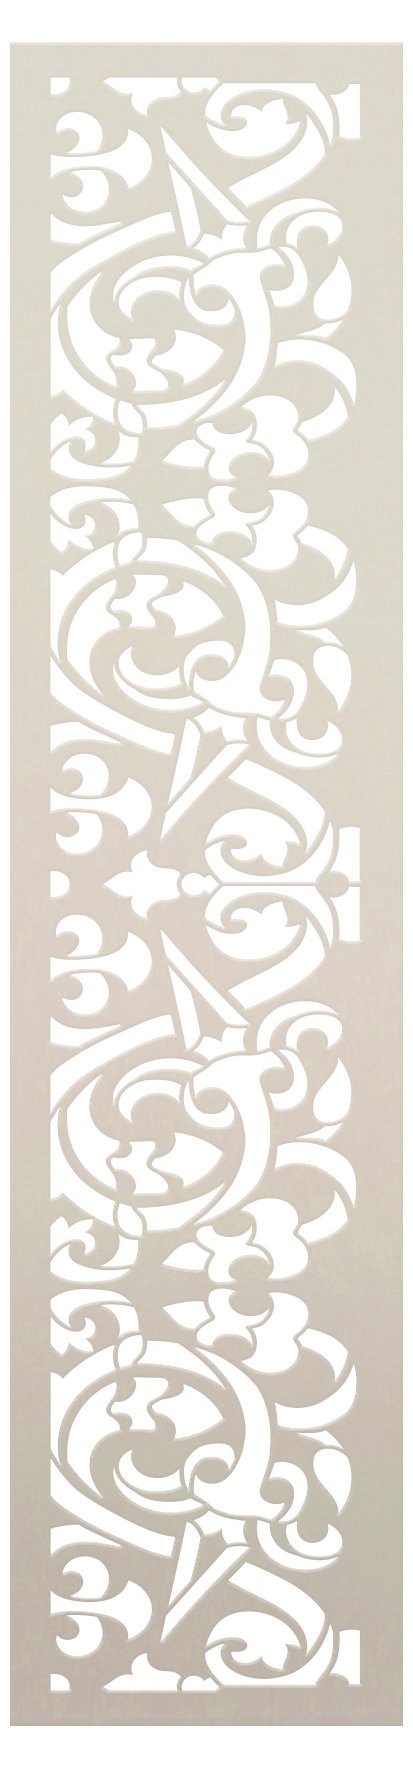 Medieval Embellished Floral Band Stencil by StudioR12 | DIY Pattern Home Decor | Craft & Paint Wood Sign | Reusable Mylar Template | Select Size | STCL5822